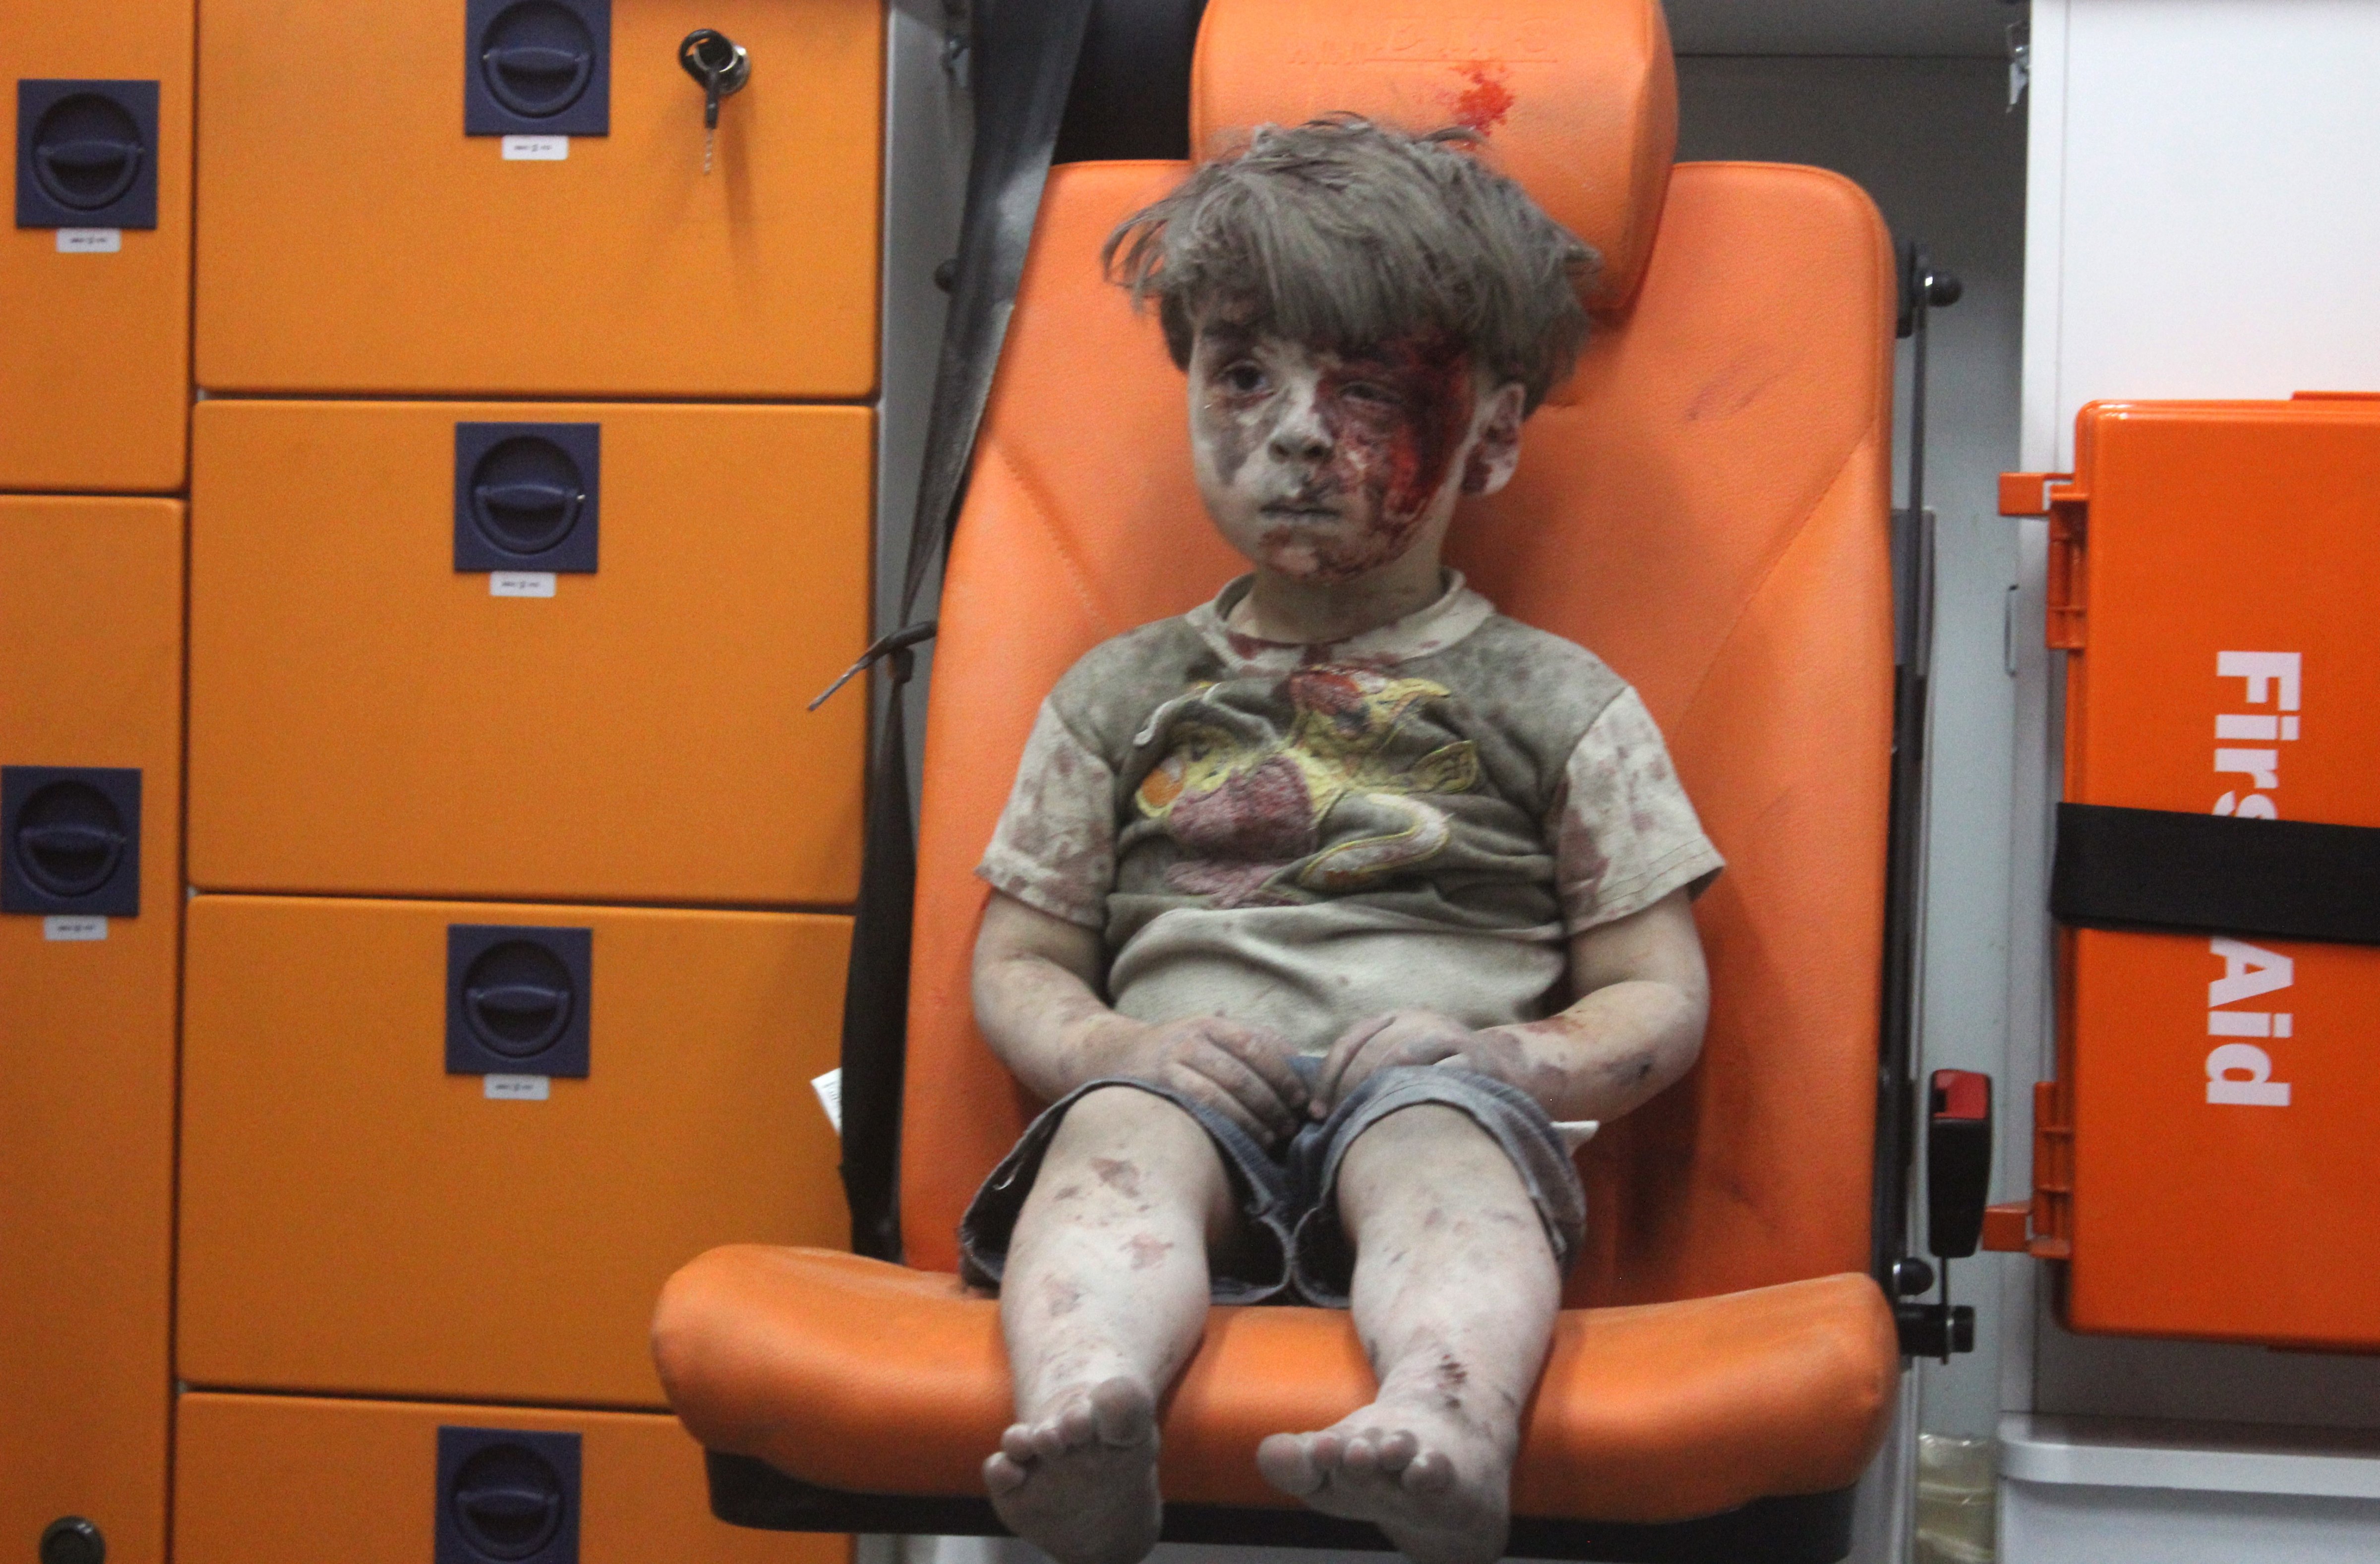 Five-year-old Syrian boy Omran Daqneesh sits in the back of the ambulance after he was injured during an airstrike in Aleppo, Syria, on Aug. 17, 2016. (Mahmud Rslan—Anadolu Agency/Getty Images)